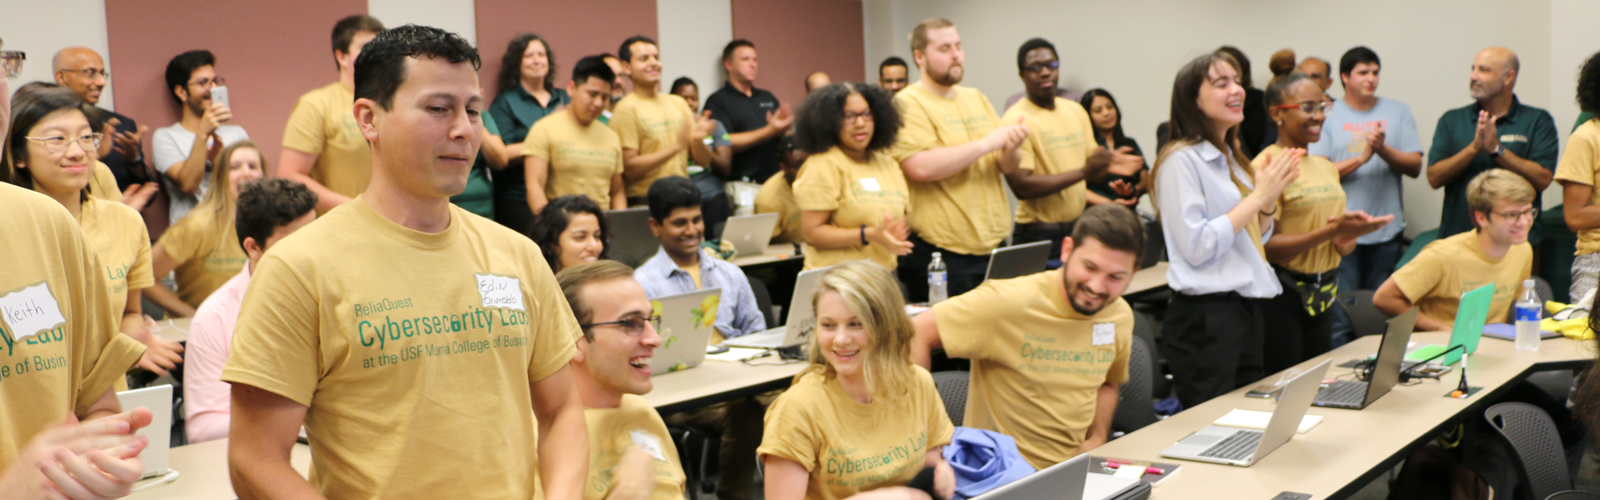 Students show their specialty T-shirts Friday on their first of class.